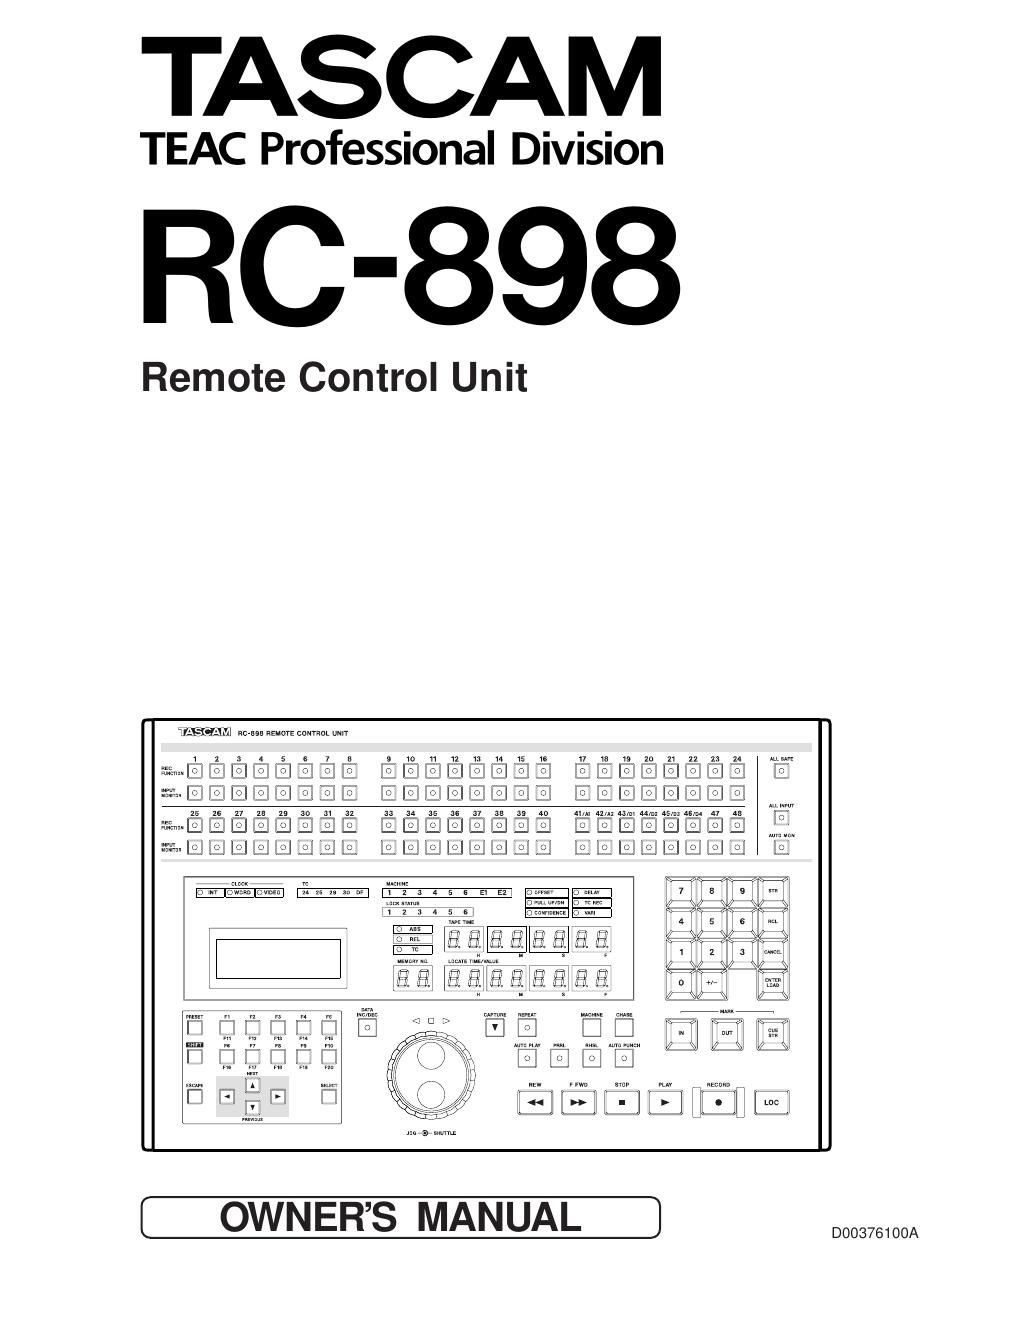 Tascam RC 898 Owners Manual